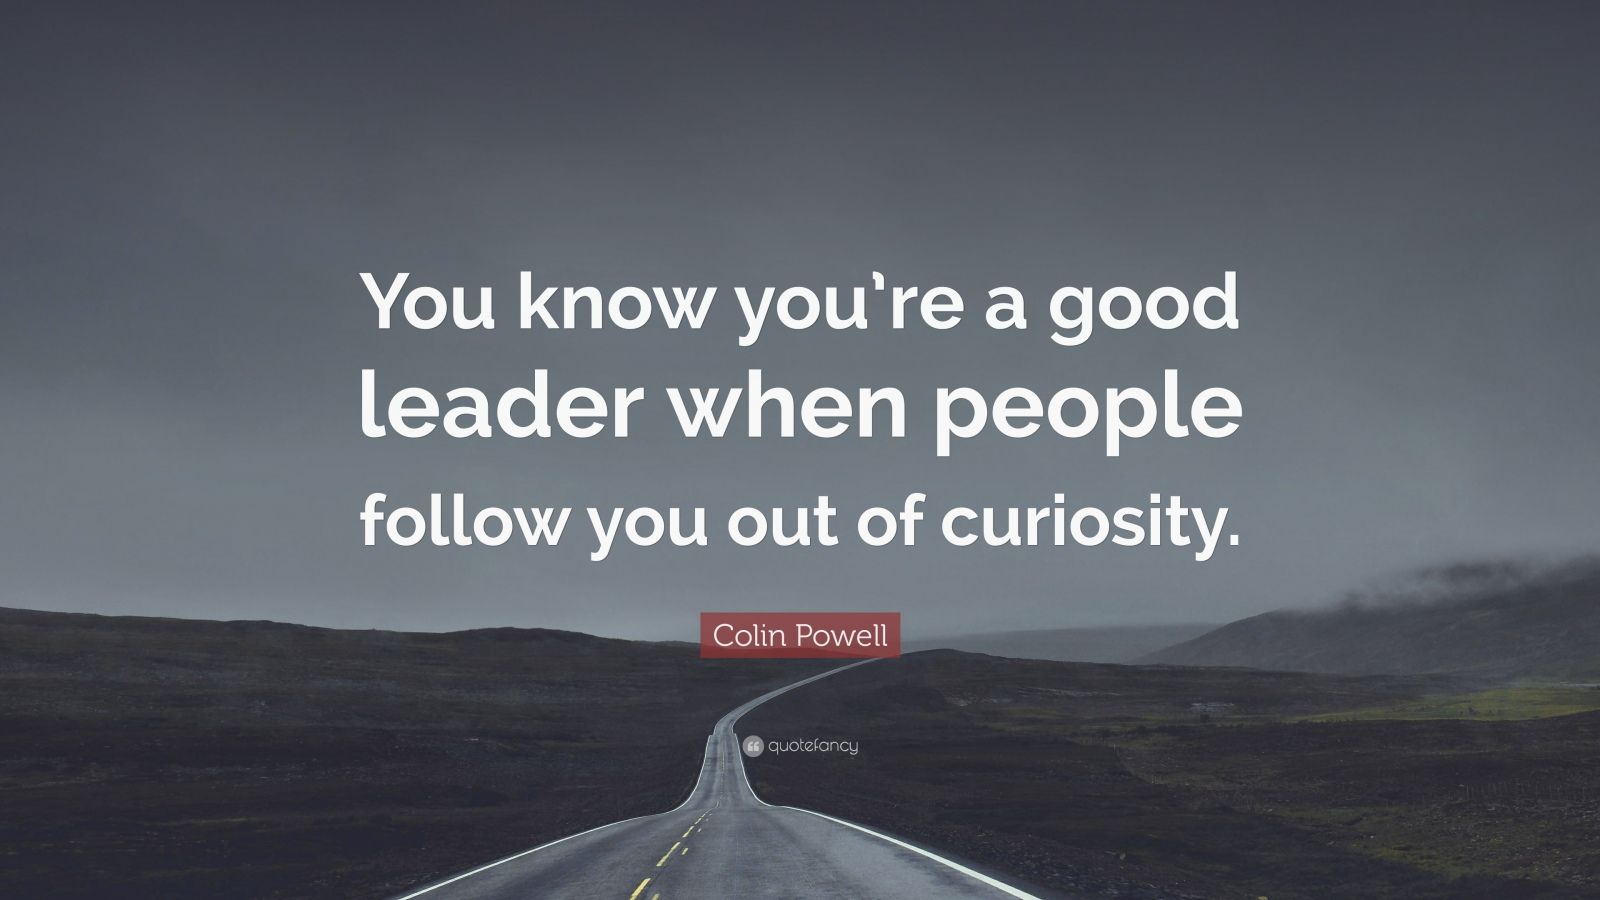 Colin Powell Quote: “You know you’re a good leader when people follow